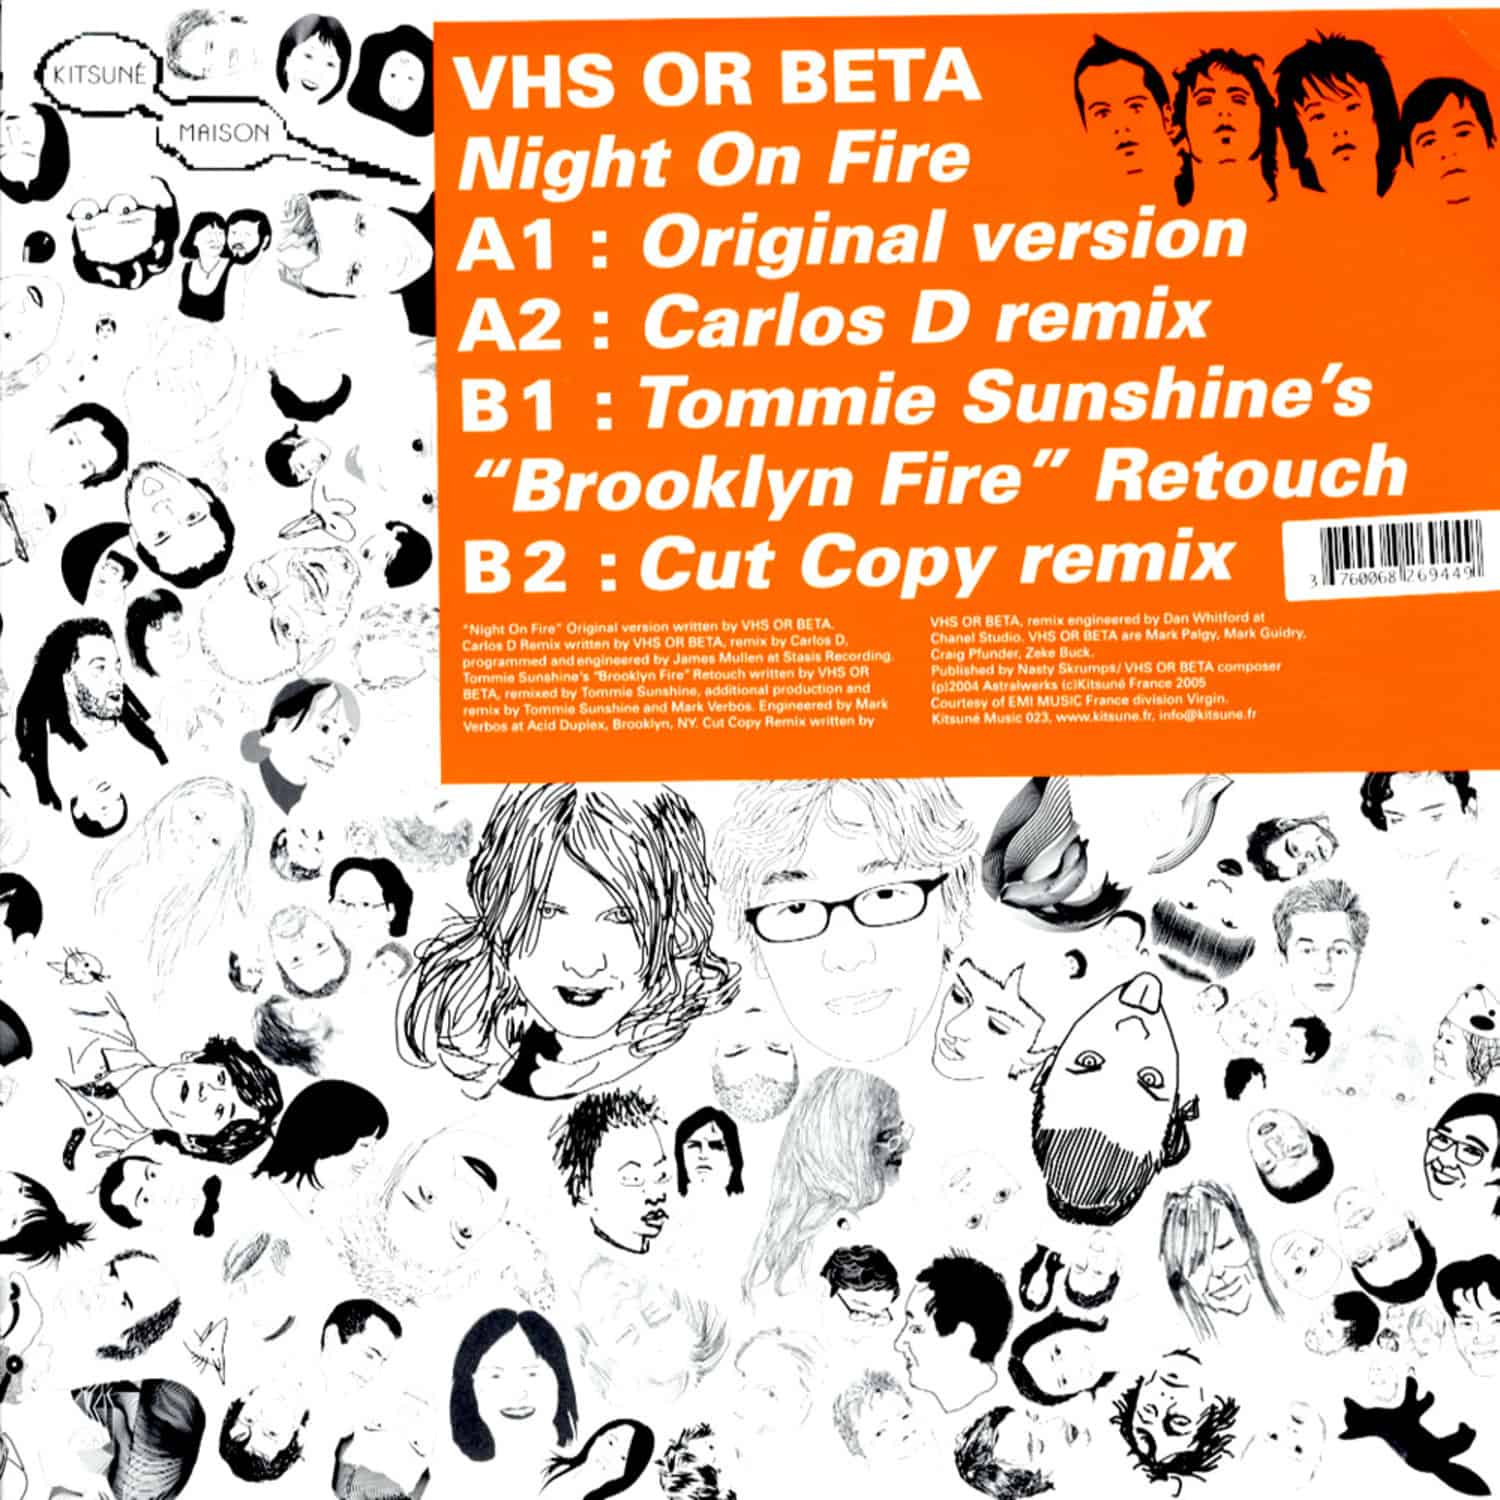 VHS or Beta - NIGHT ON FIRE